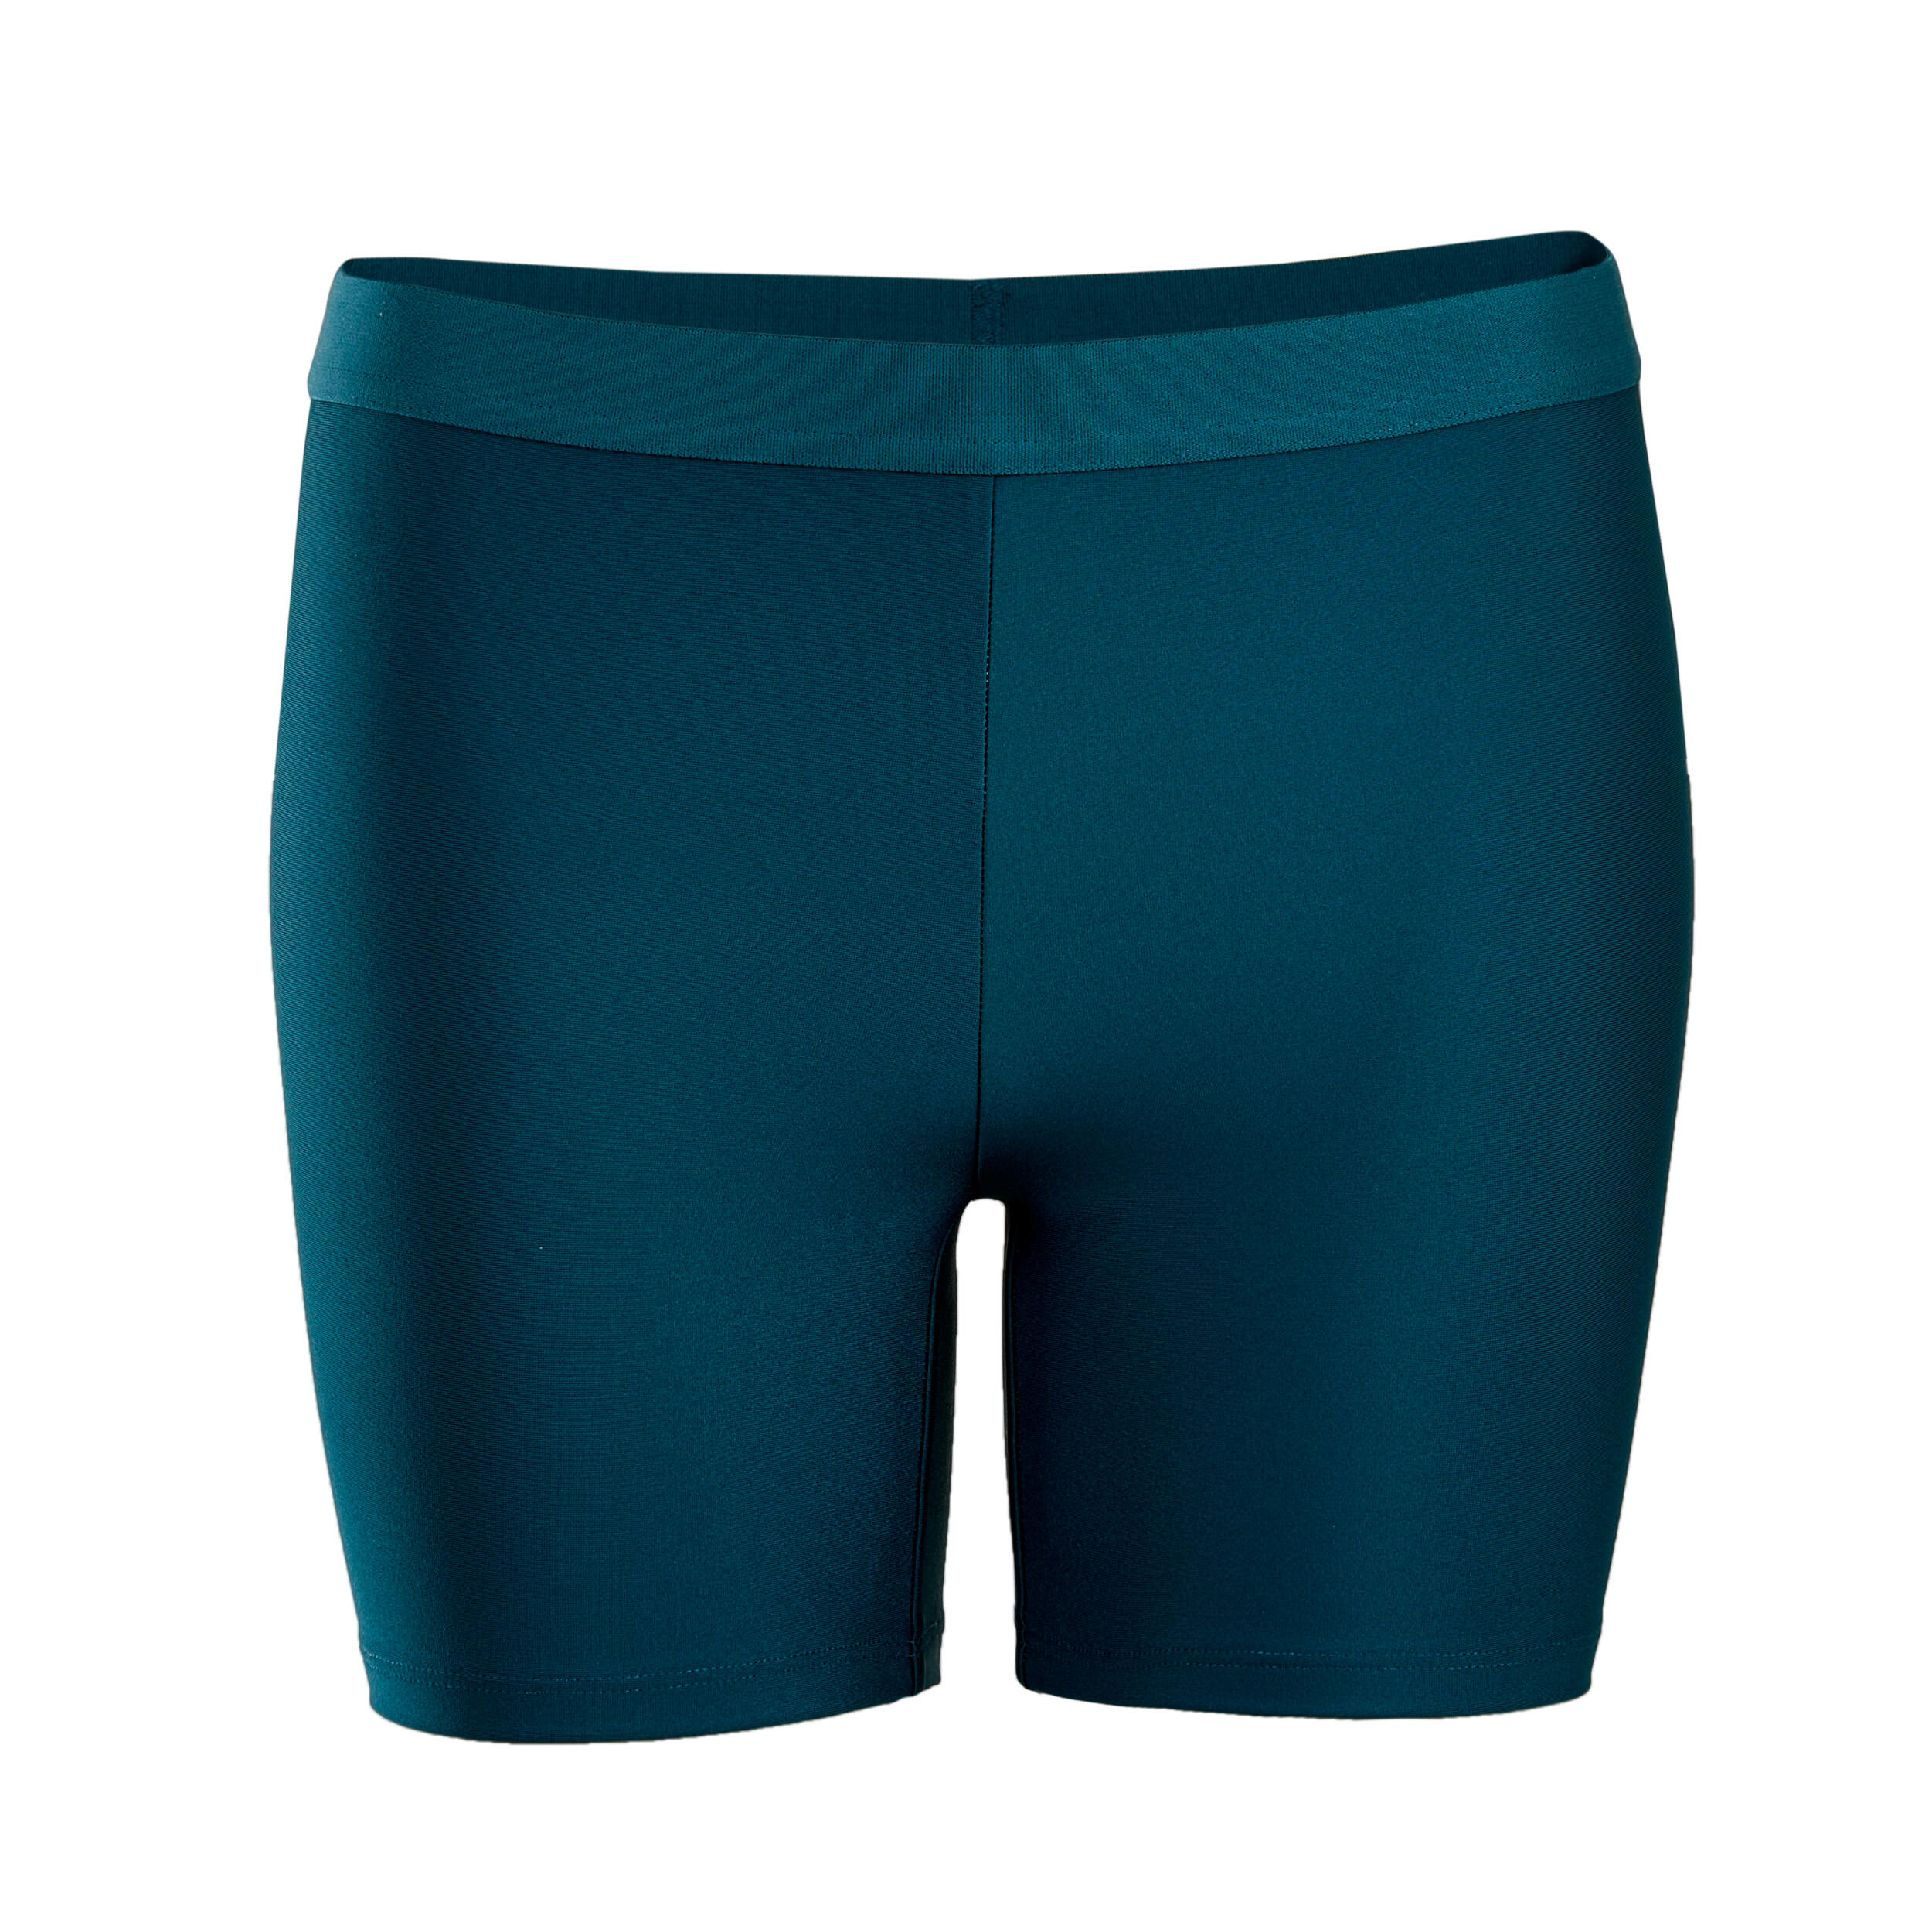 Women's Tennis Quick-Dry Shorts Dry 900 - Turquoise 4/4